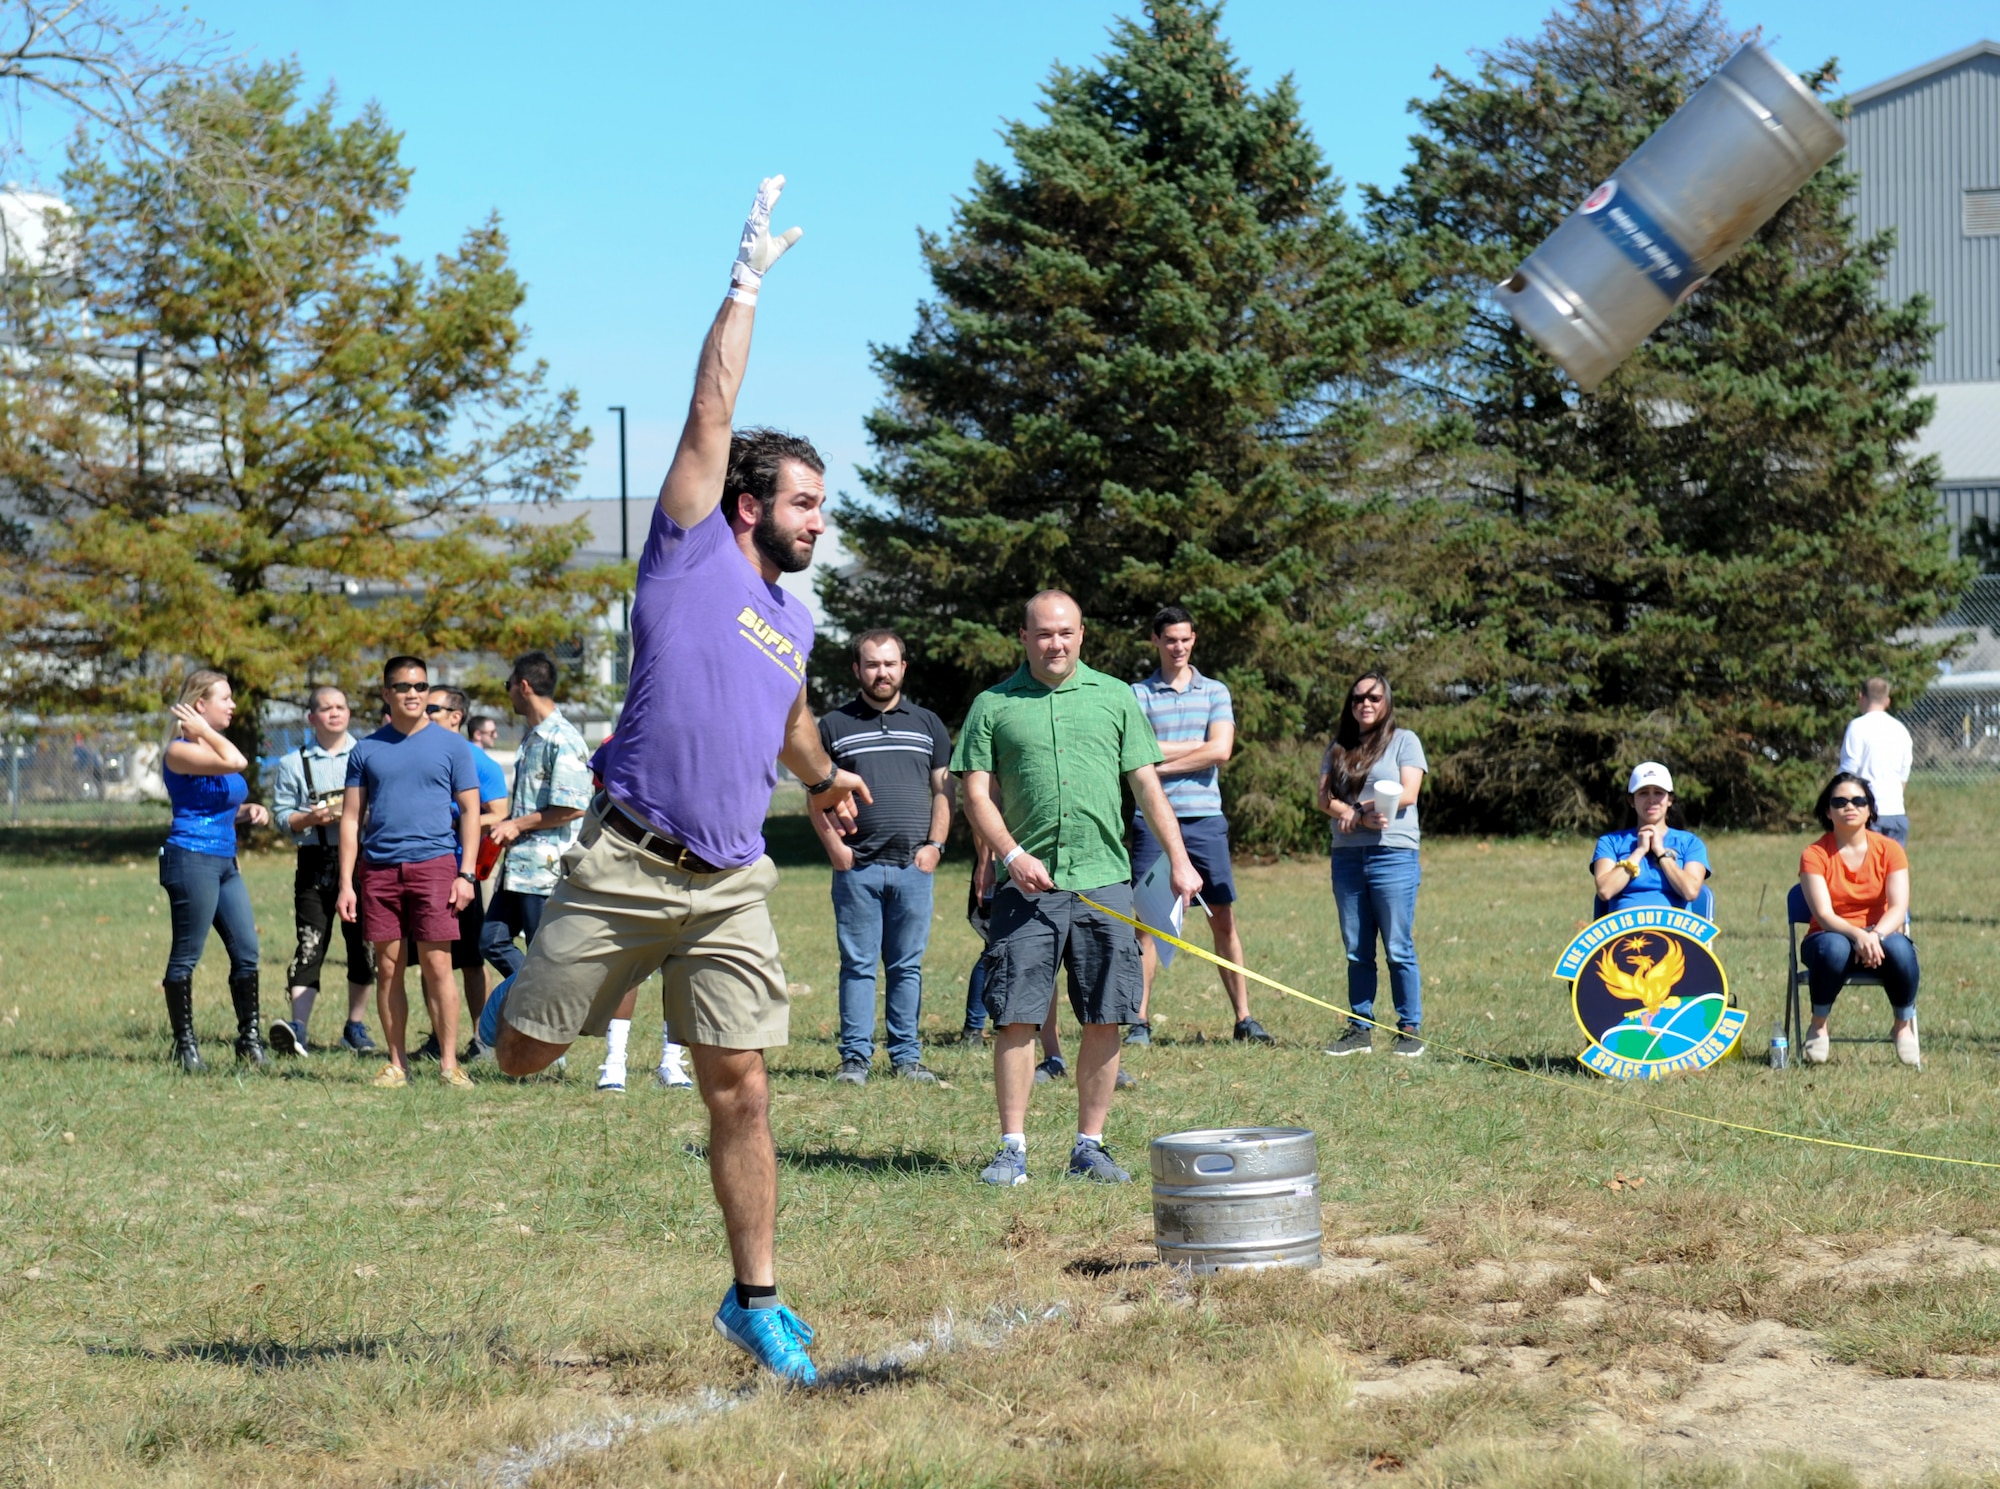 James Ross, National Air and Space Intelligence Center member, tosses a keg during the first round of the Keg Toss Competition at NASIC’s annual Oktoberfest at Bass Lake, Wright-Patterson Air Force Base, Ohio on Sept. 27, 2019. The keg toss had two rounds this year with the winner, Ross, throwing for a distance of nearly 44 feet. (U.S. Air Force photo by Senior Airman Samuel Earick/Released)